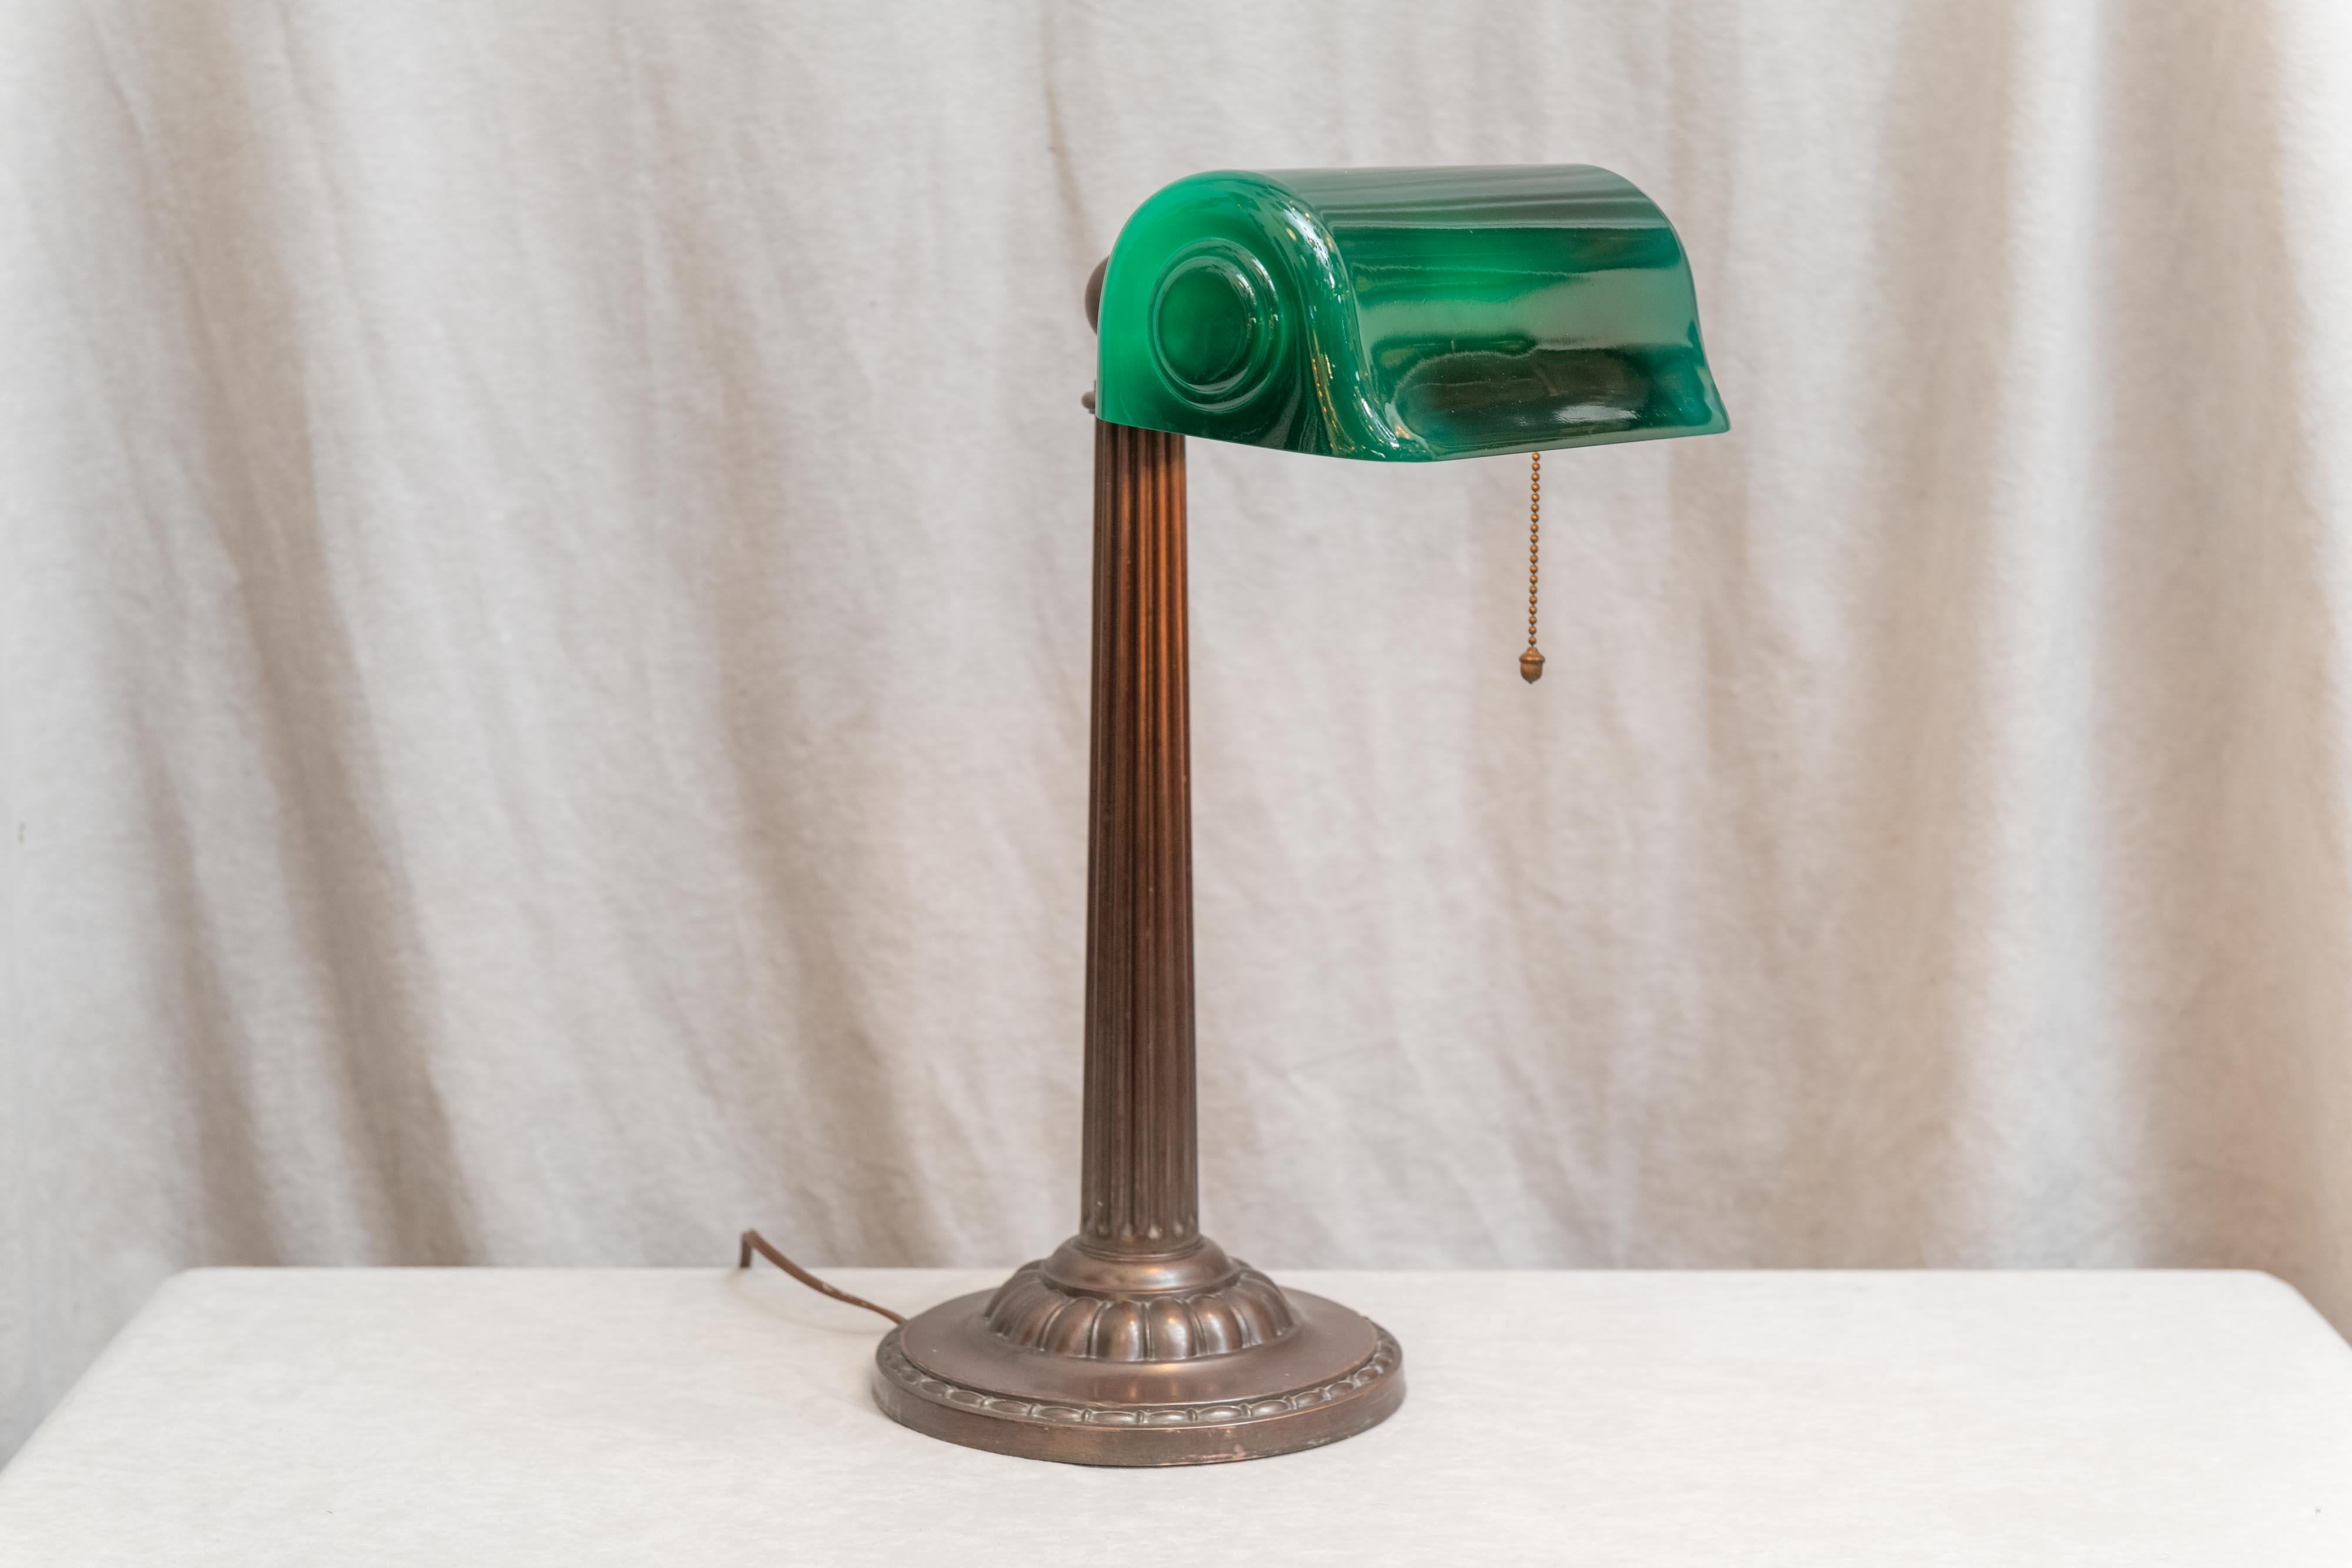 We try to carry a nice selection of desk lamps in our lighting shop. Our first priority is to find nice quality period banker's lamp. While several companies produced these lamps, we find that the Verdelite Co. are our most popular. While Emeralite